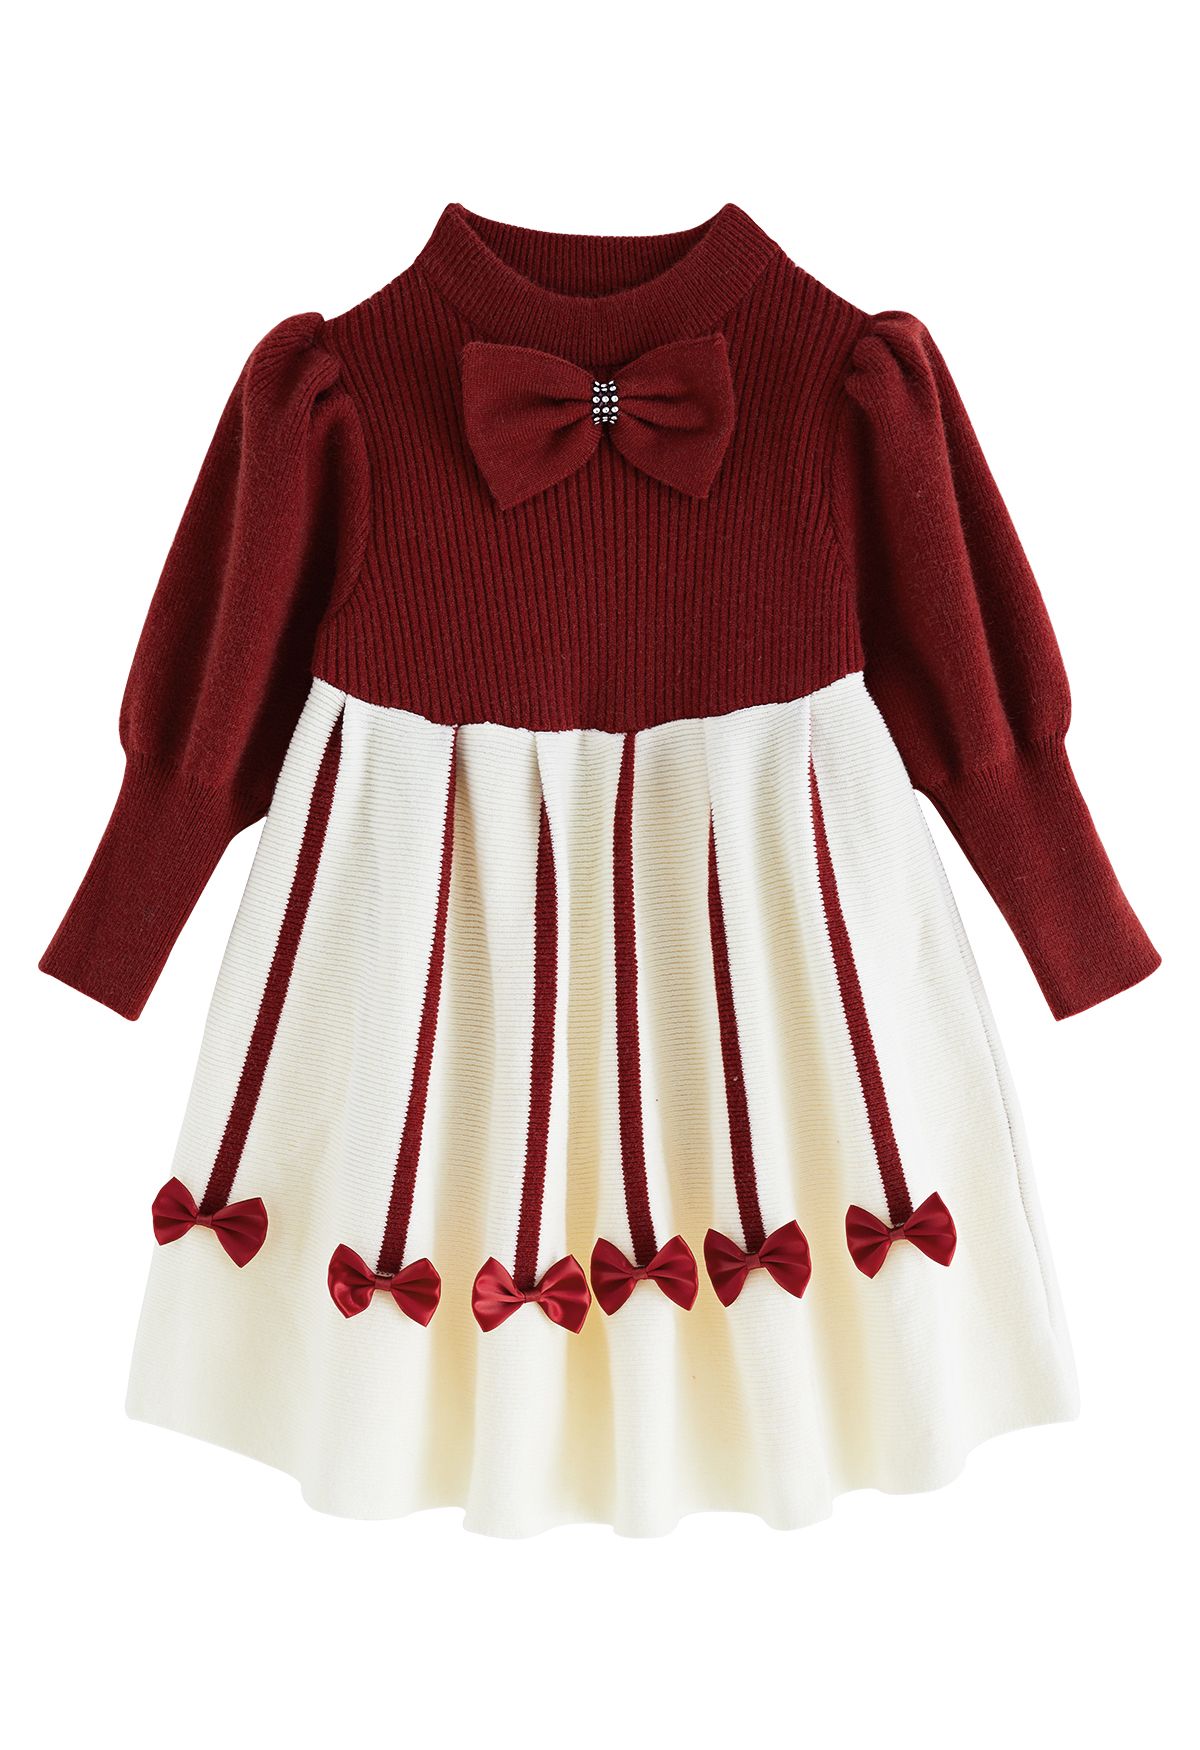 Sweet Red Bowknot Knit Dress For Kids - Retro, Indie and Unique Fashion